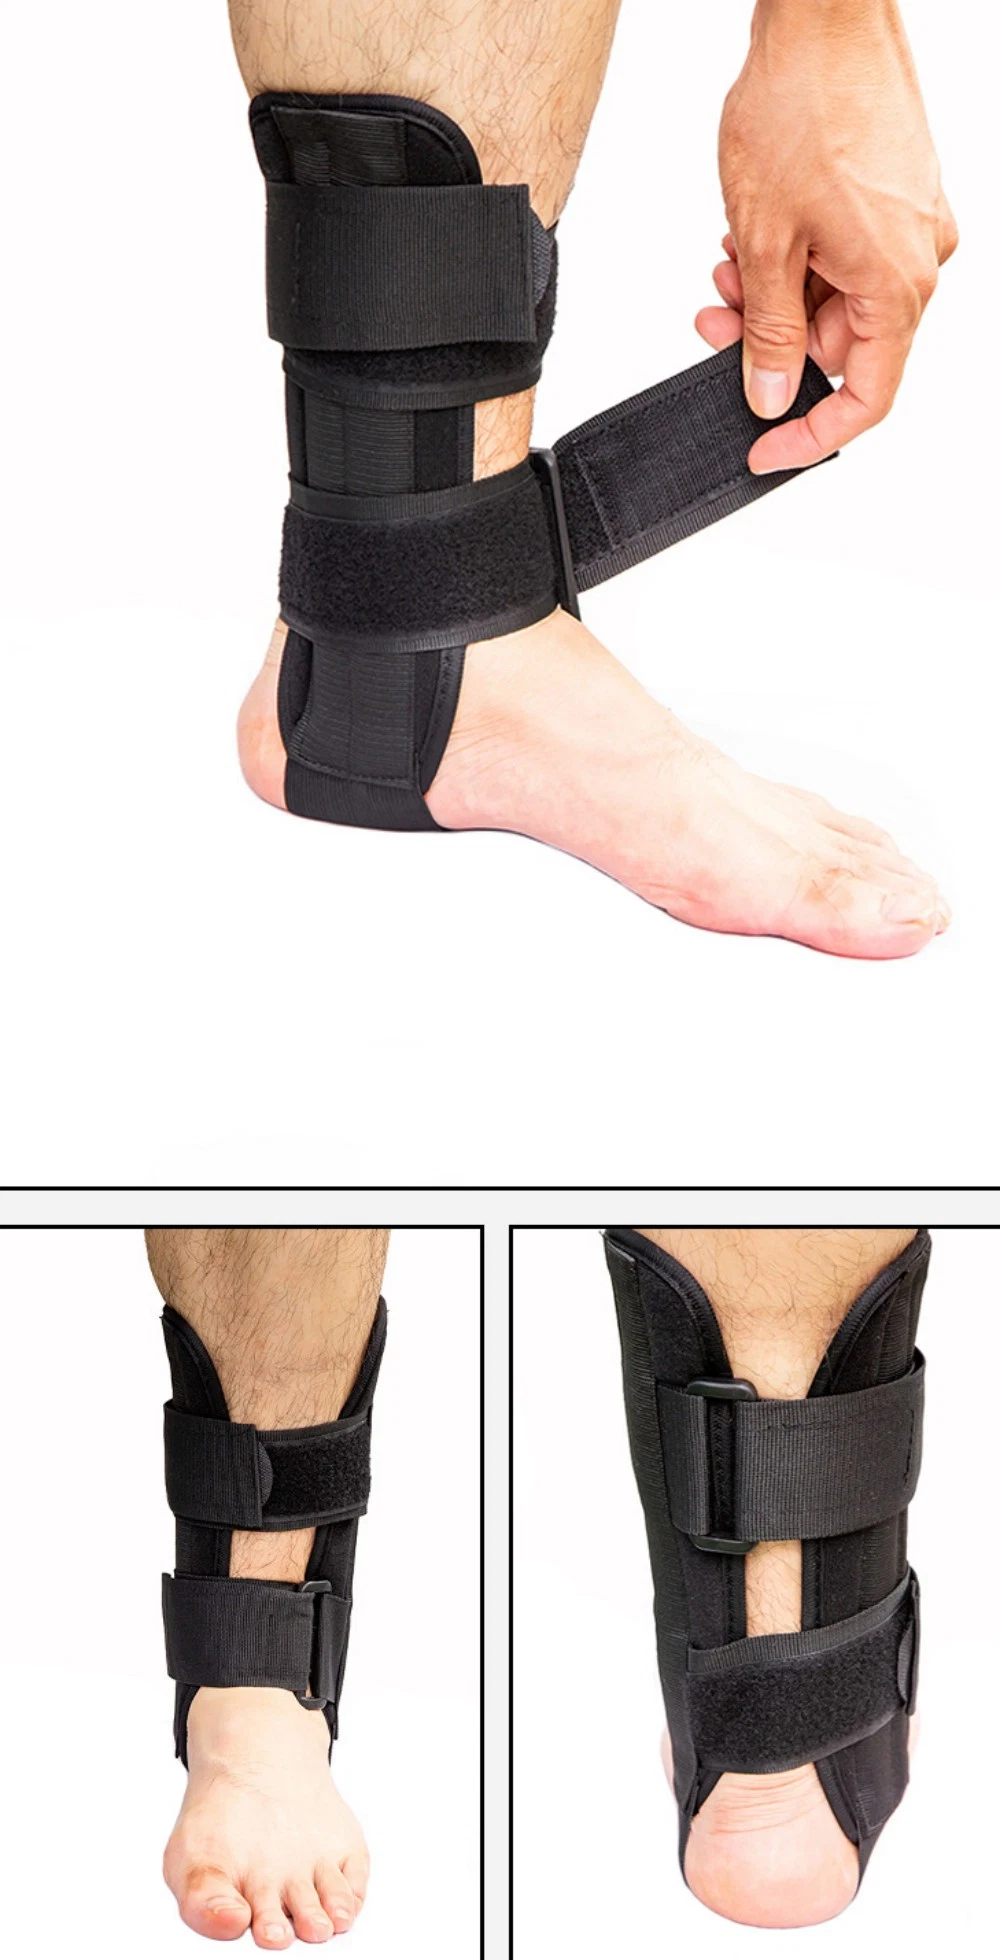 High Quality New Orthopedic Ankle Fixation Band Medical Ankle Brace Support Guard Outdoor Sports Protector Ankle Straps